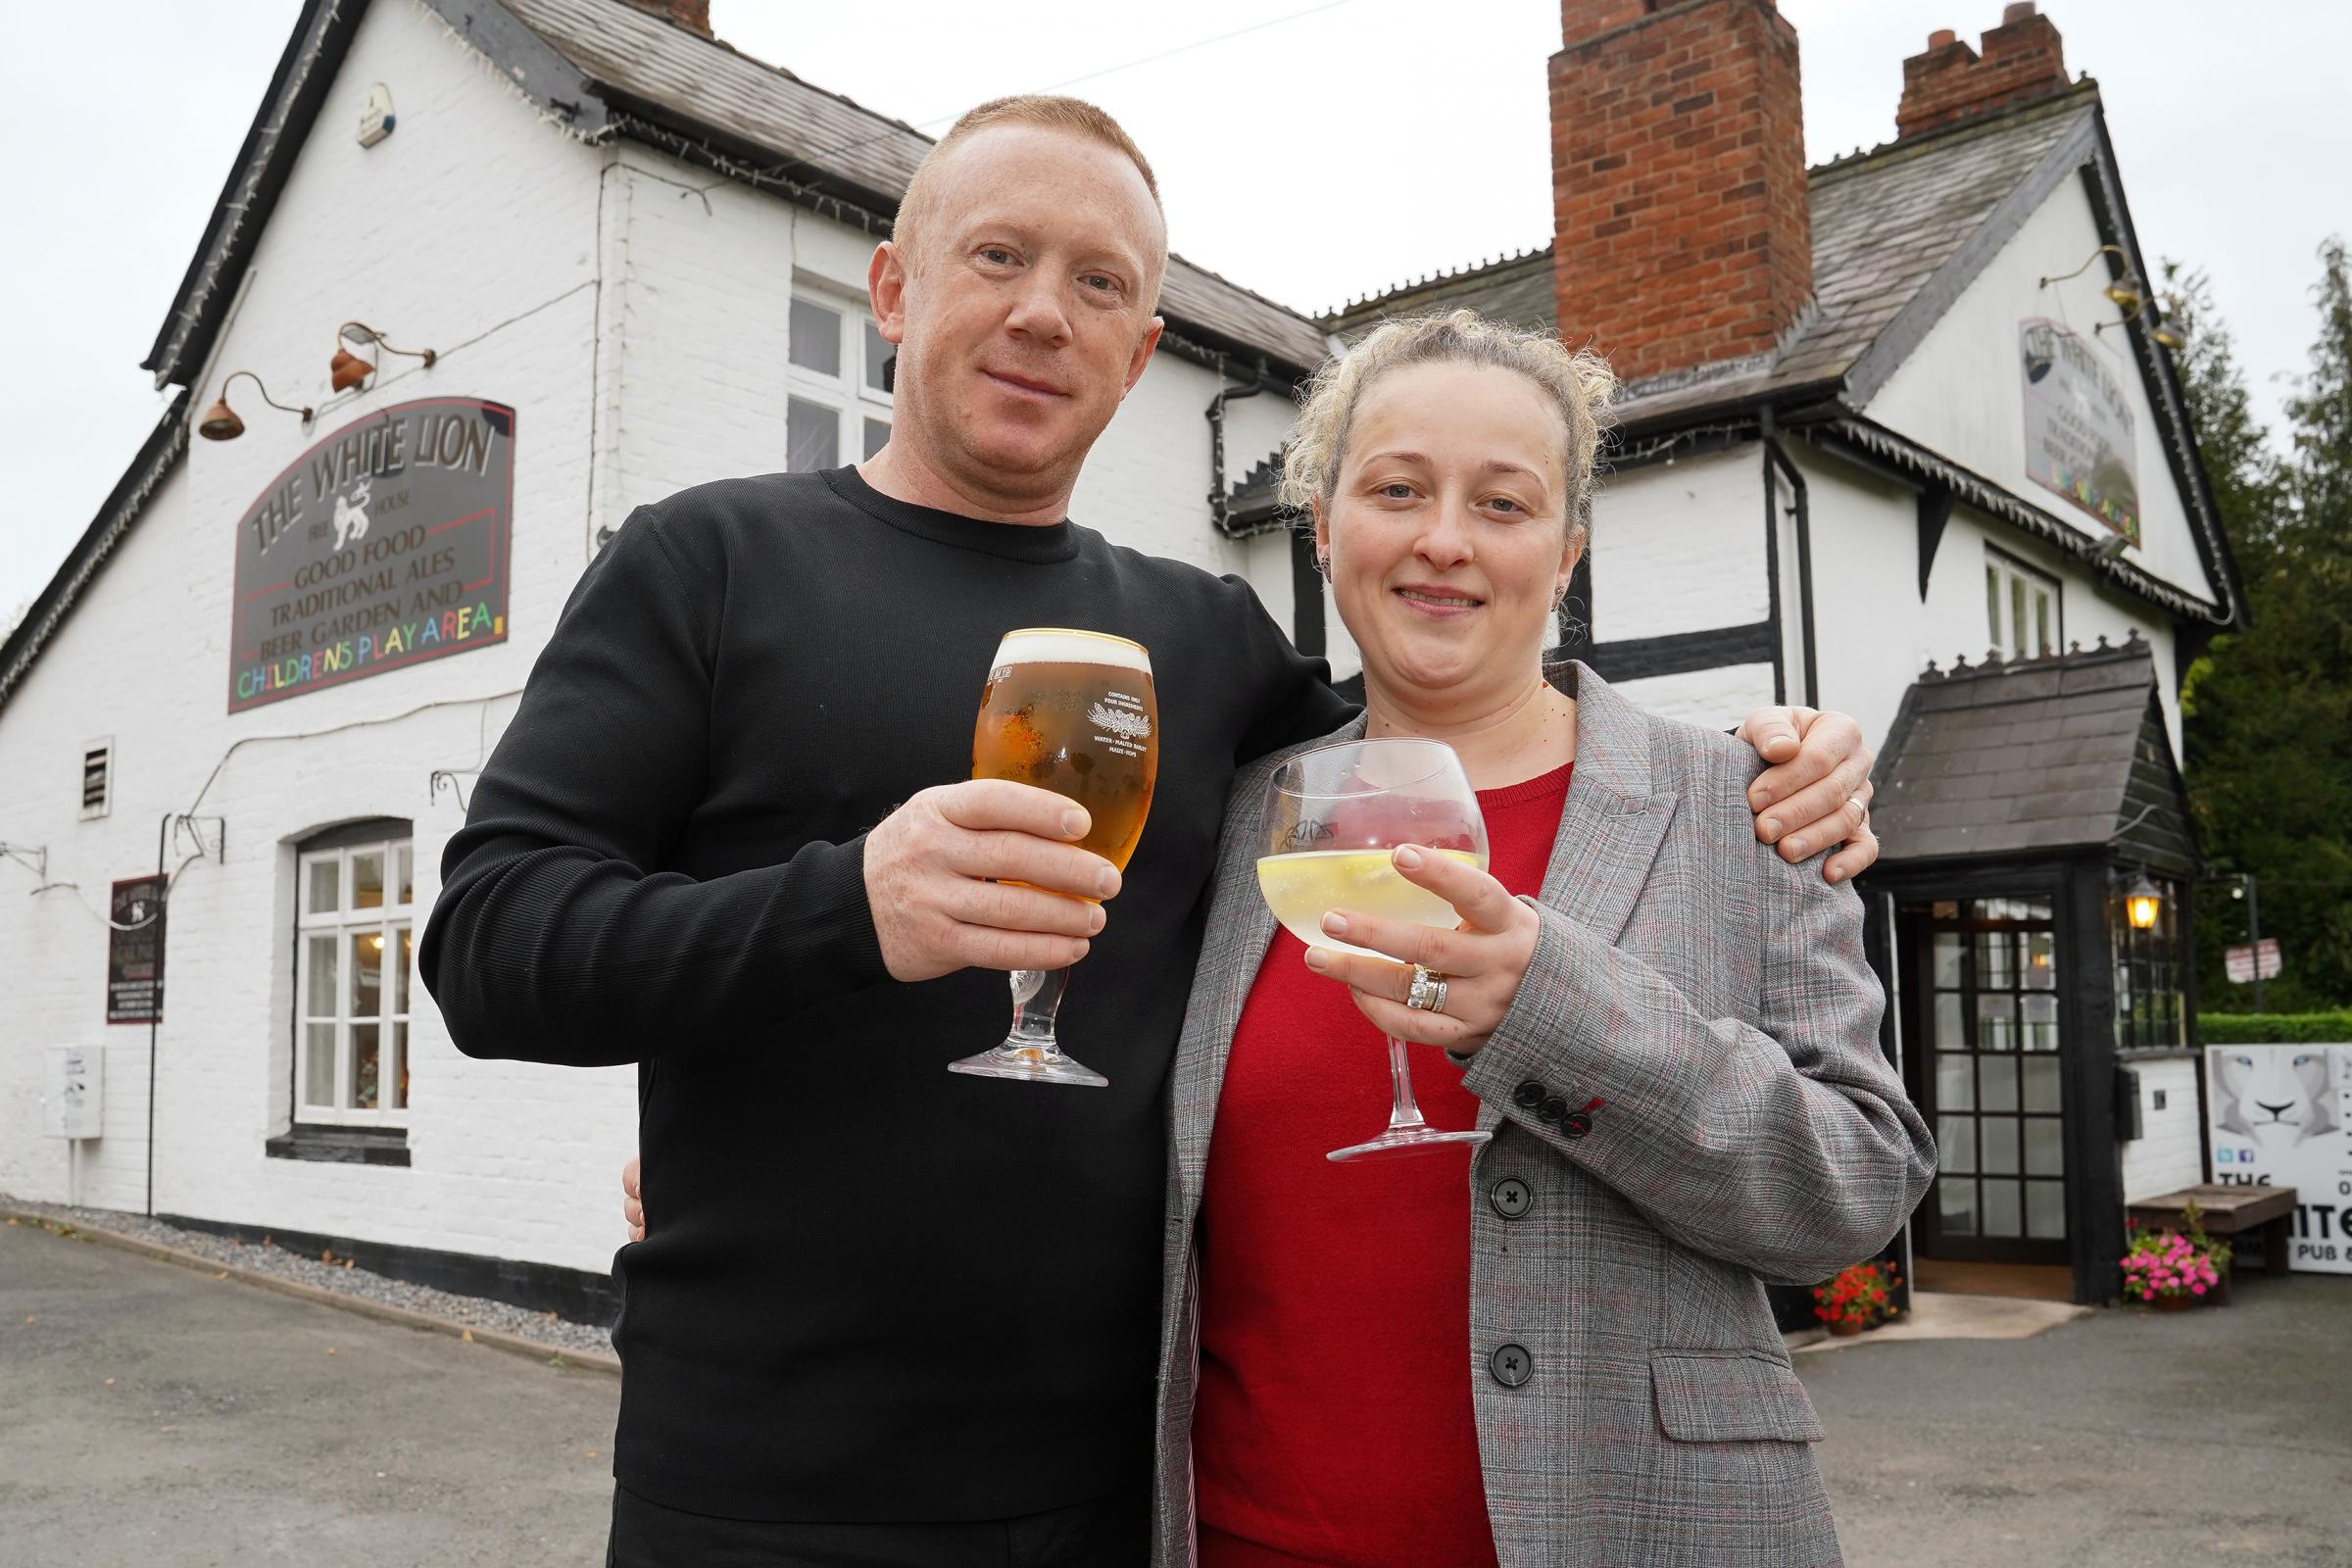 Owners of The White Lion pub in Leominster, Laz Pal and his wife, Nina..